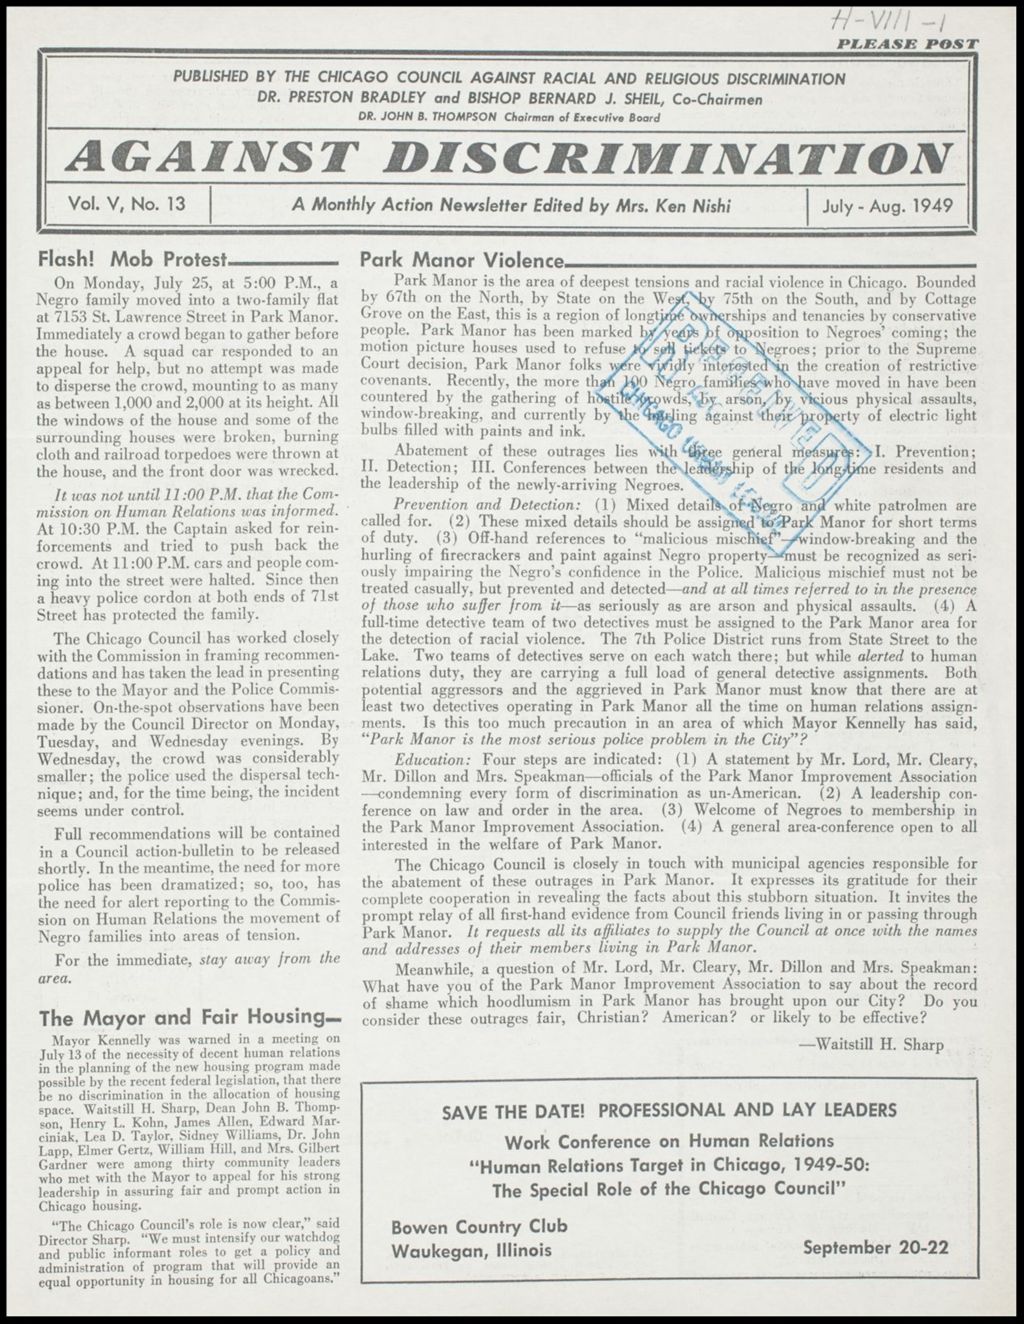 Miniature of Chicago Council Against Racial and Religious Discrimination newsletters and publications, 1949-1953 (Folder I-2639)